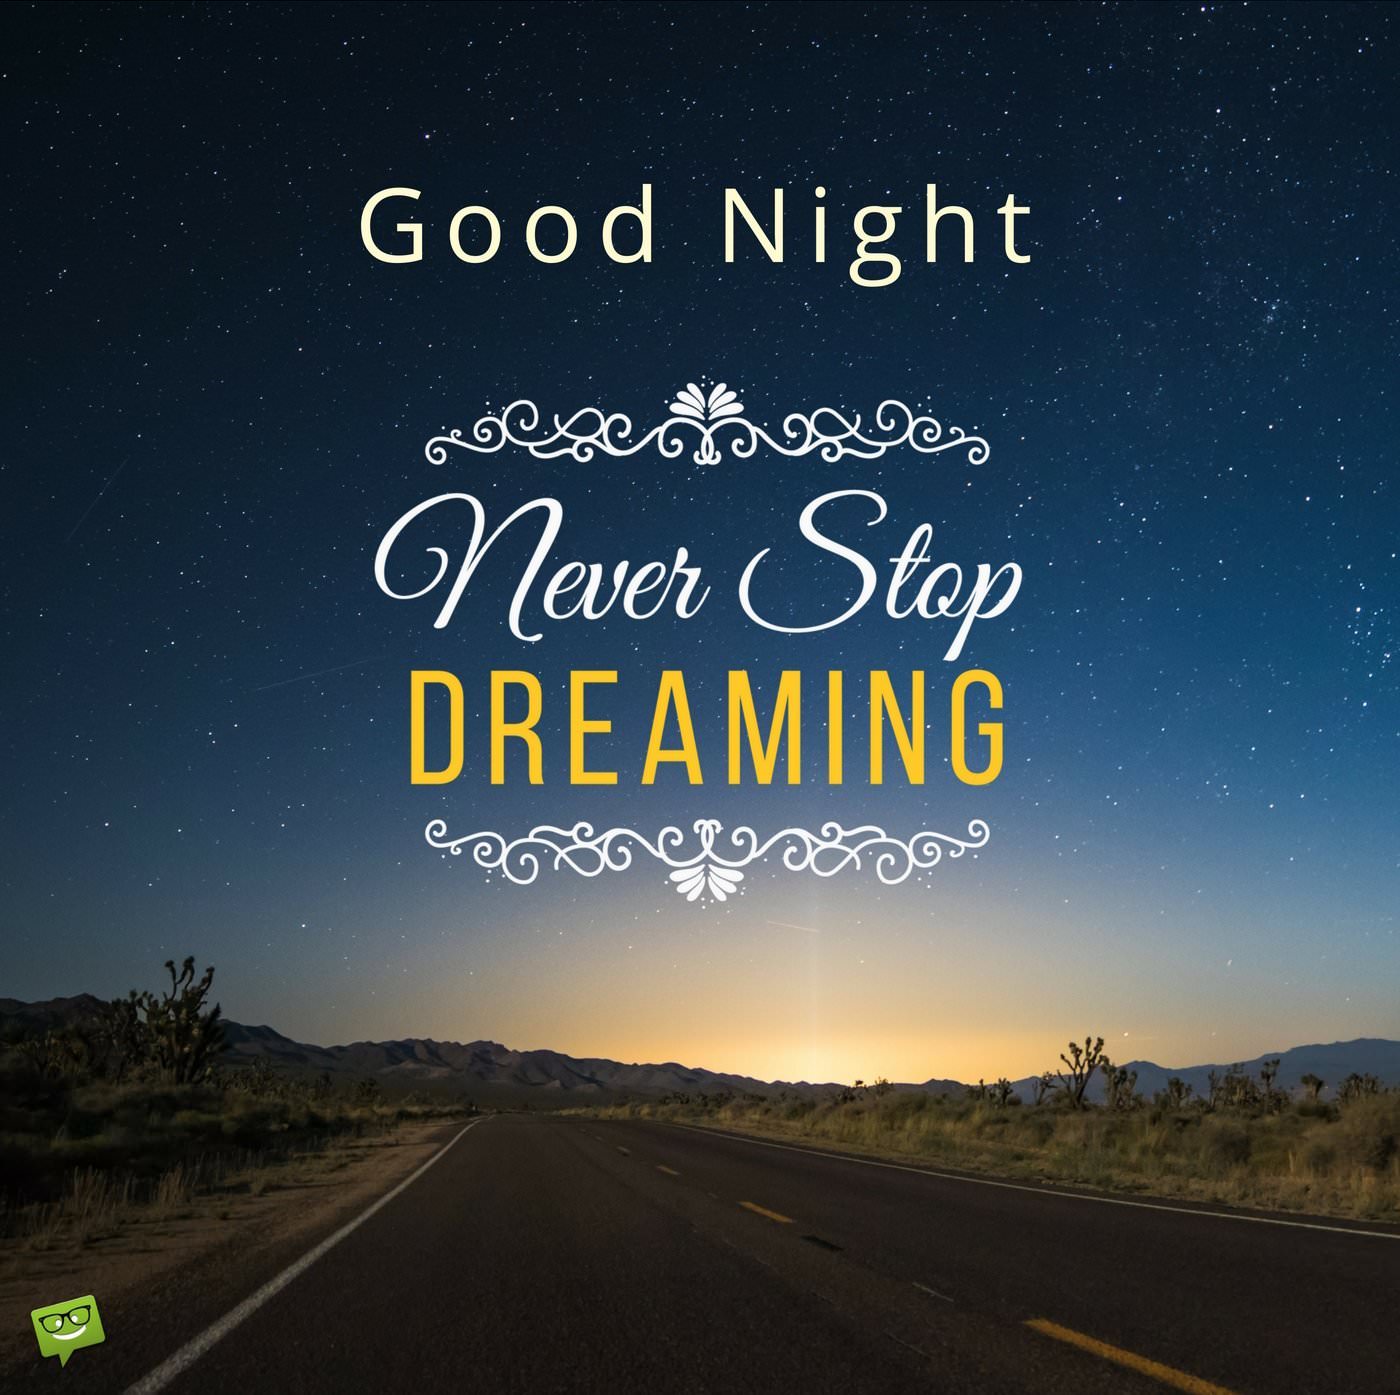 Good Night Message With Motivational Quote And Pic Of Night Sky. Never Stop Dreaming 